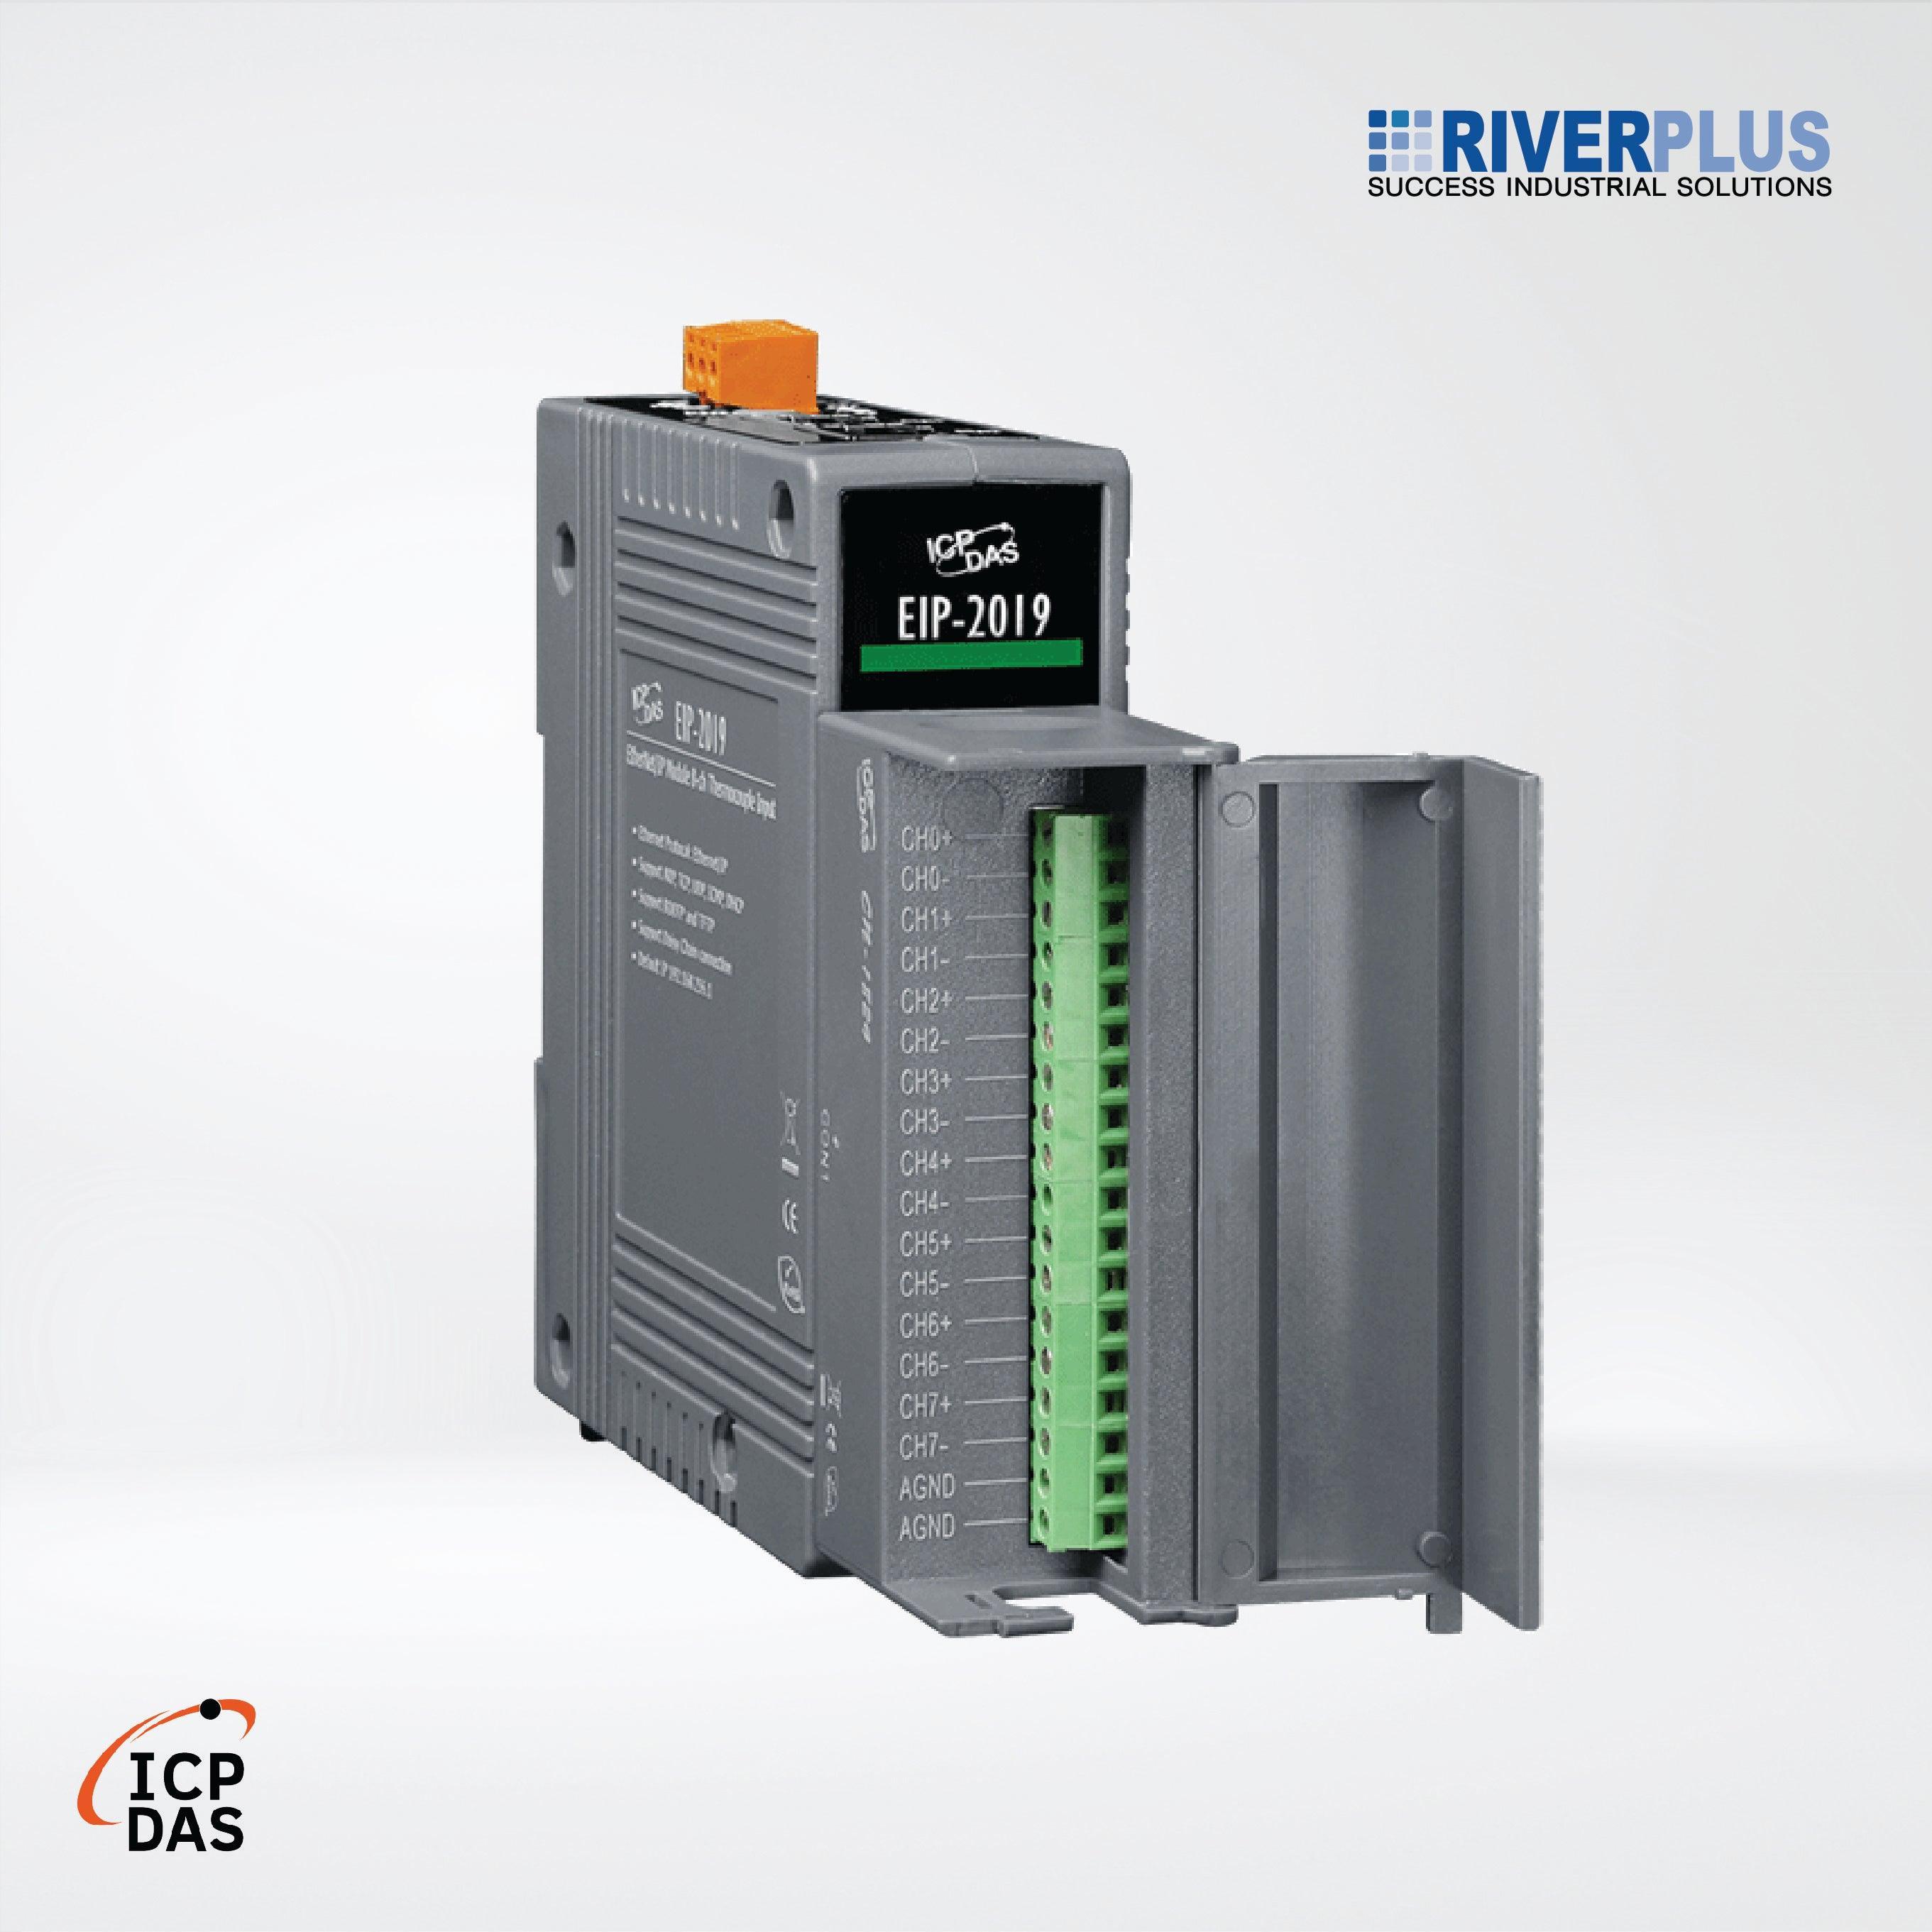 EIP-2019/S EtherNet/IP Module (Isolated 8-ch Universal Analog Input) - Riverplus